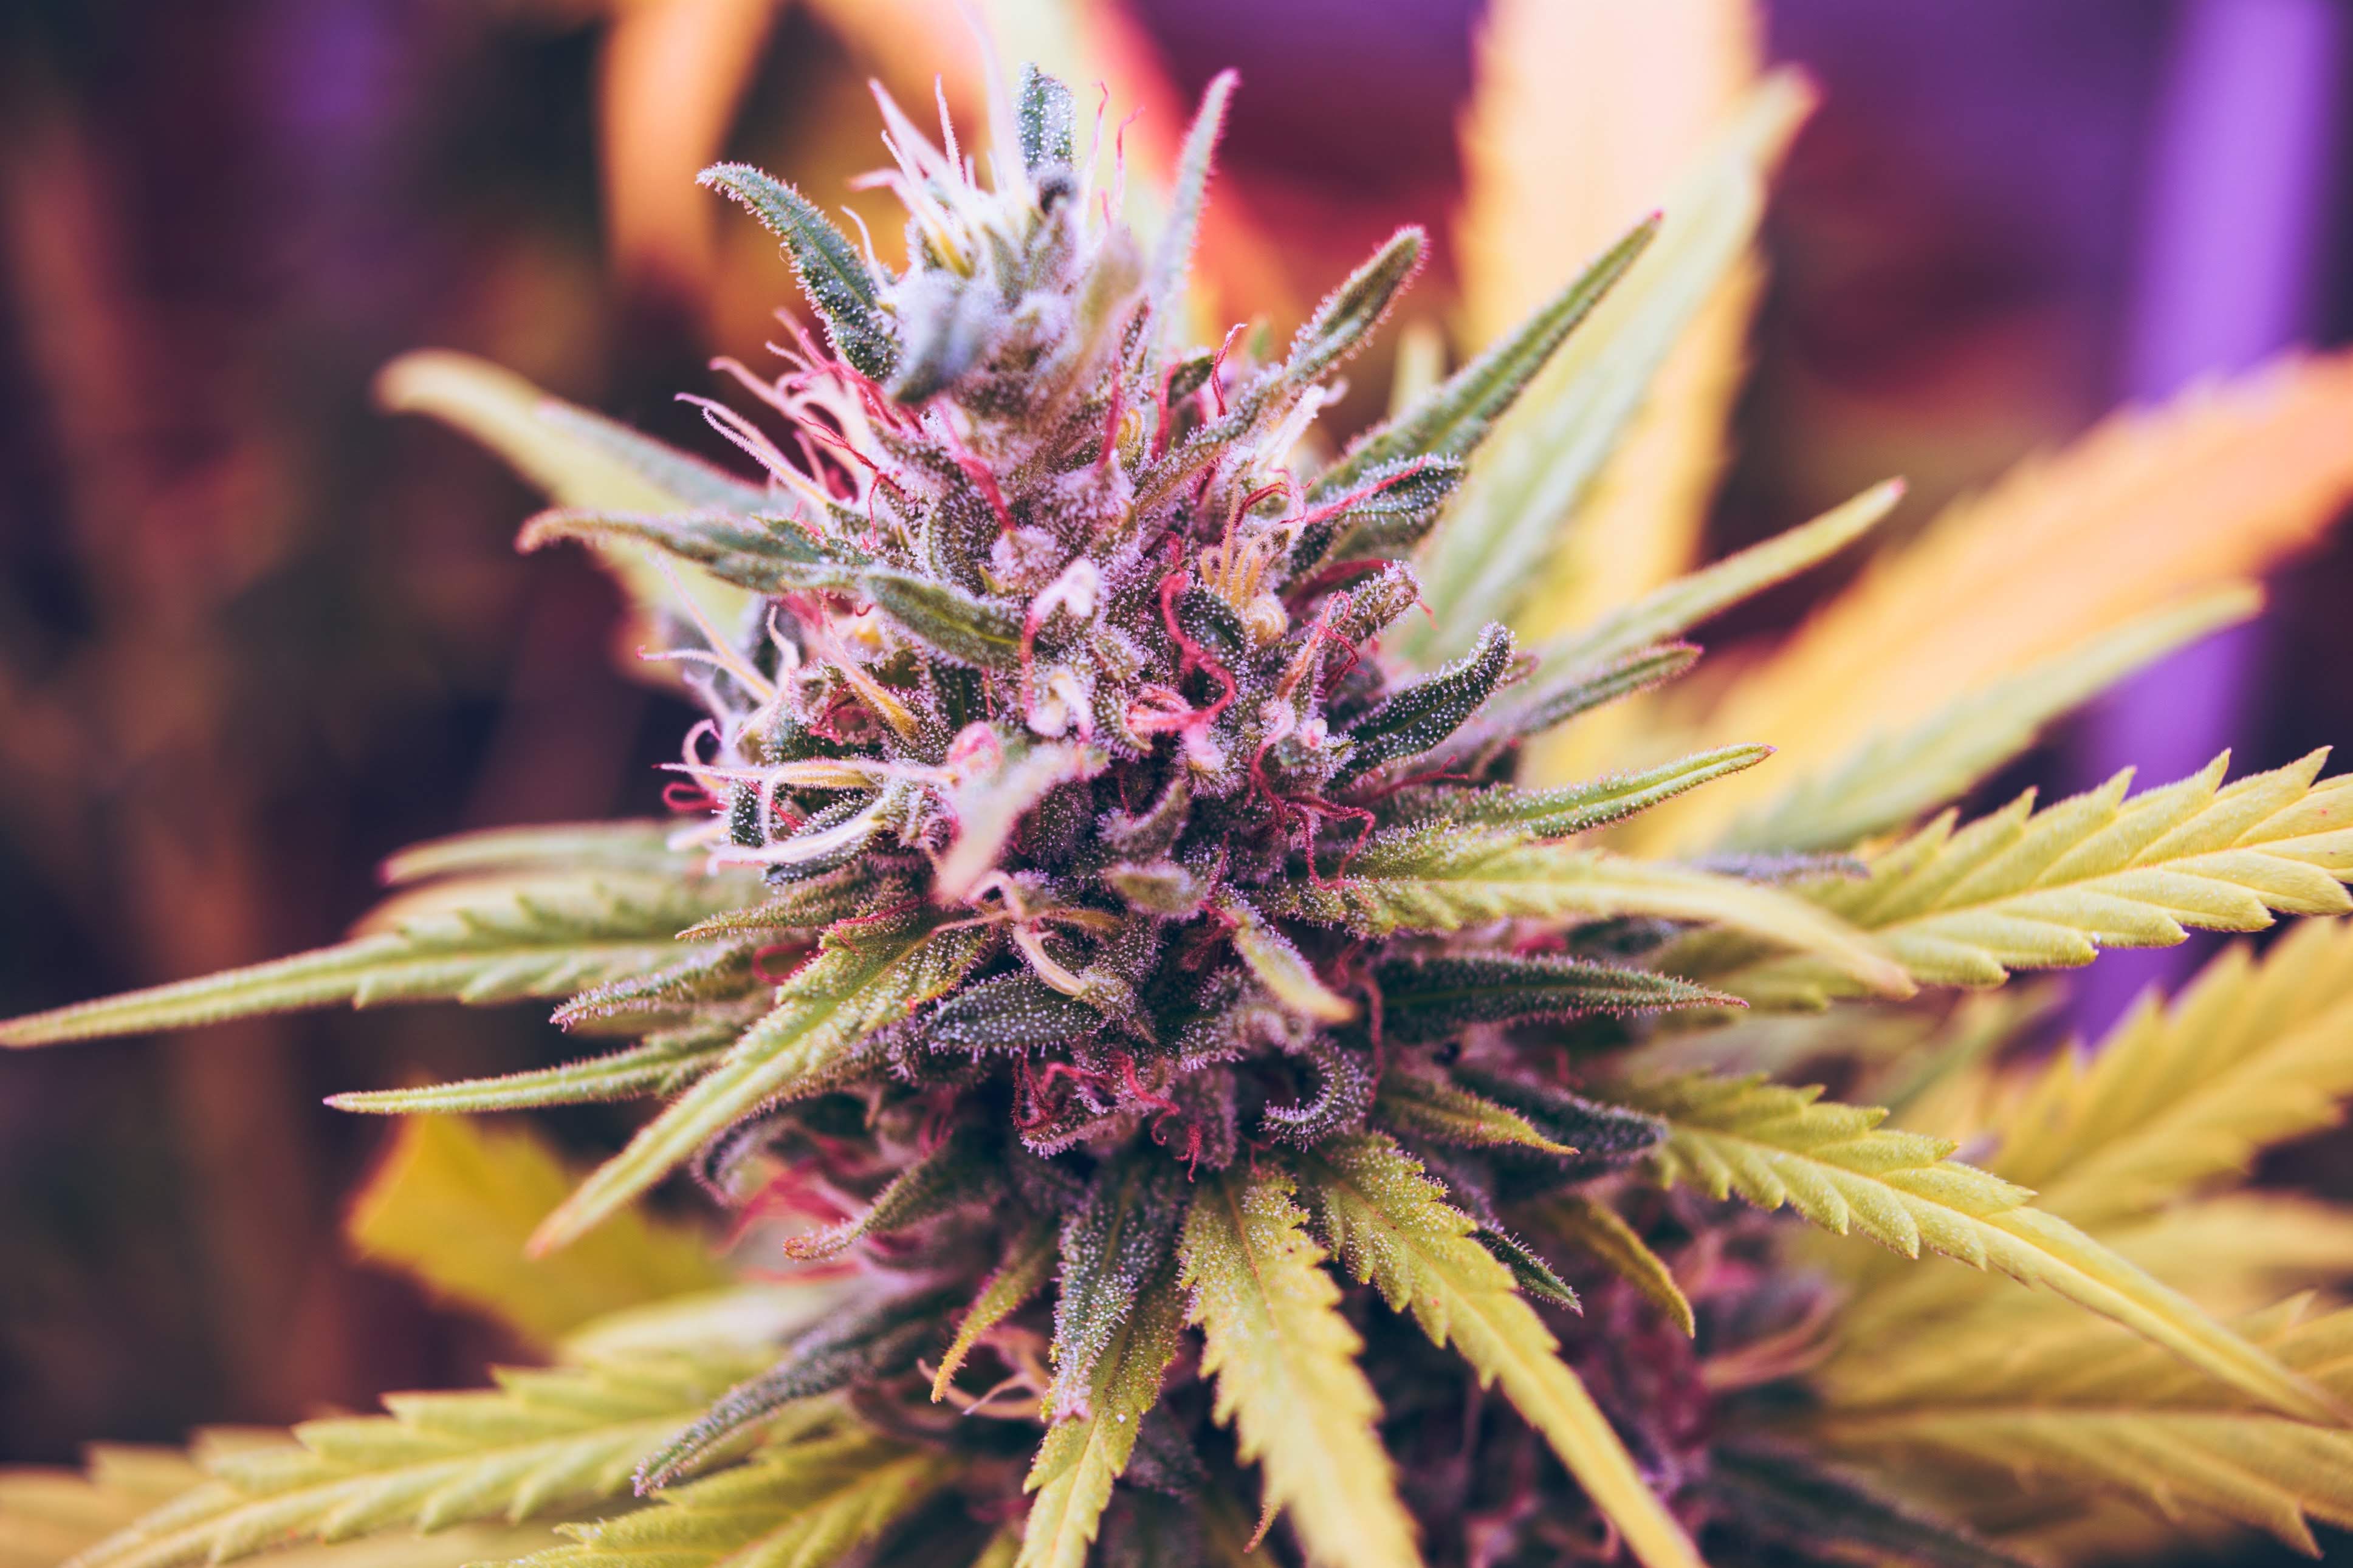 Alleviate Pain, What Are The Best Strains To Alleviate Pain?